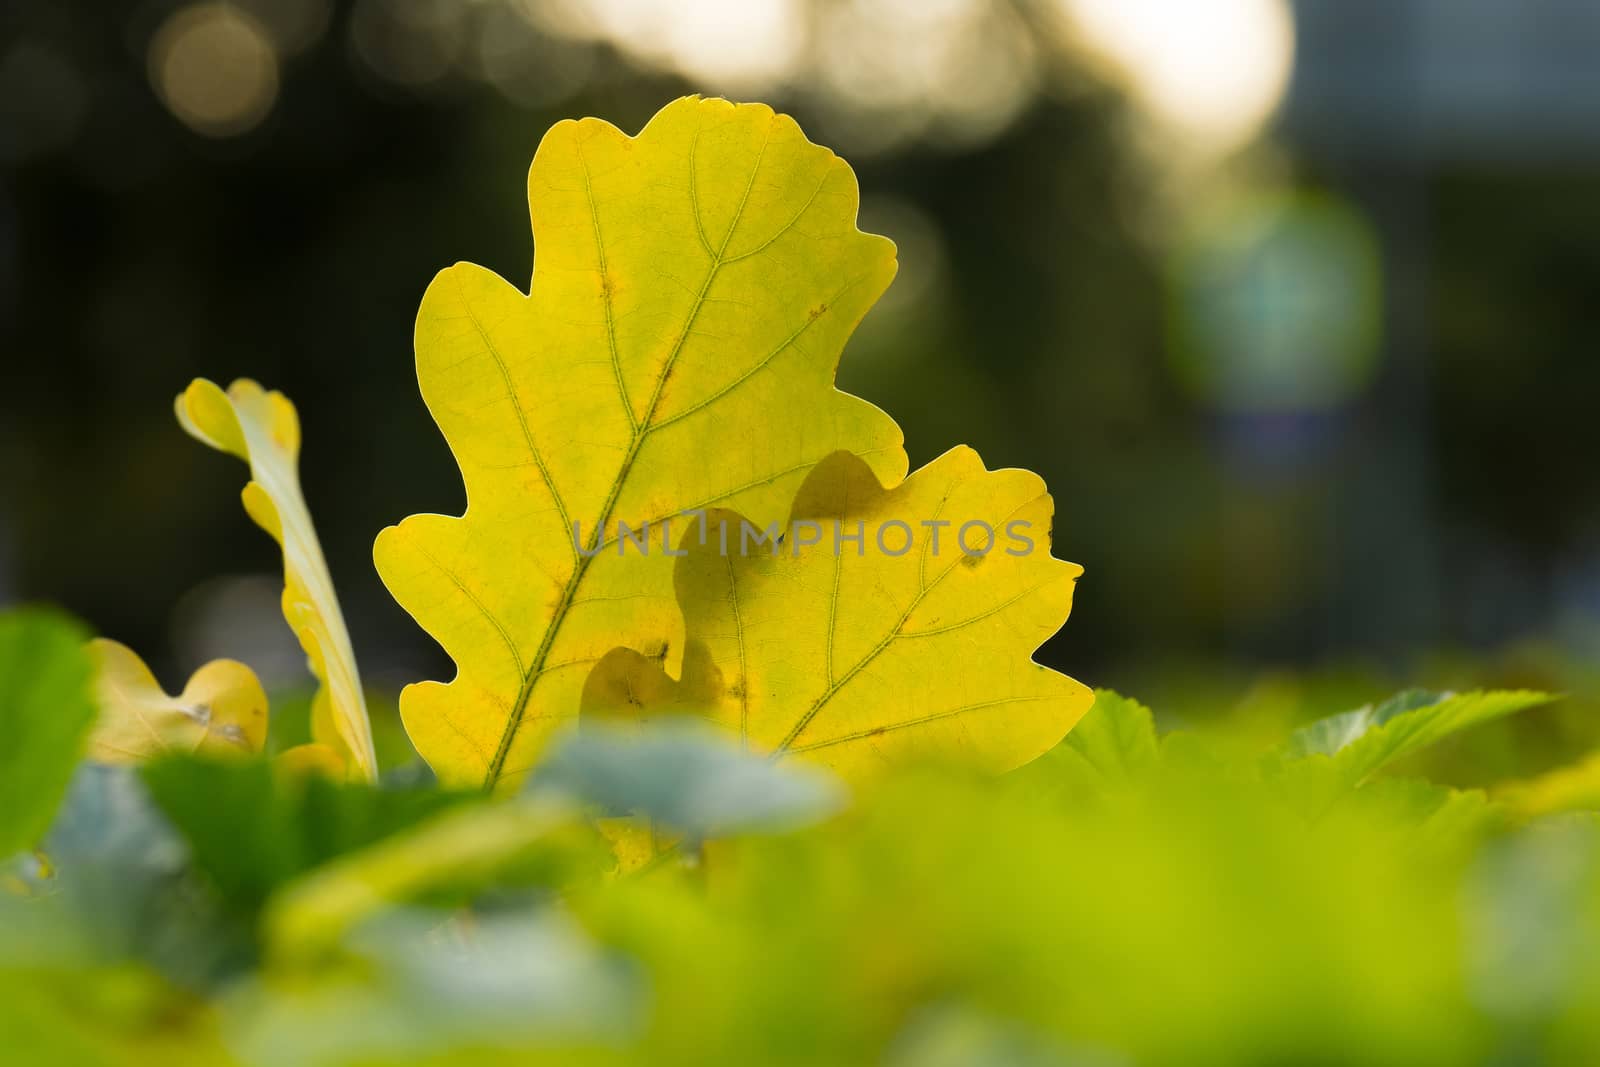 The picture shows the autumn yellow leaves on the bush.